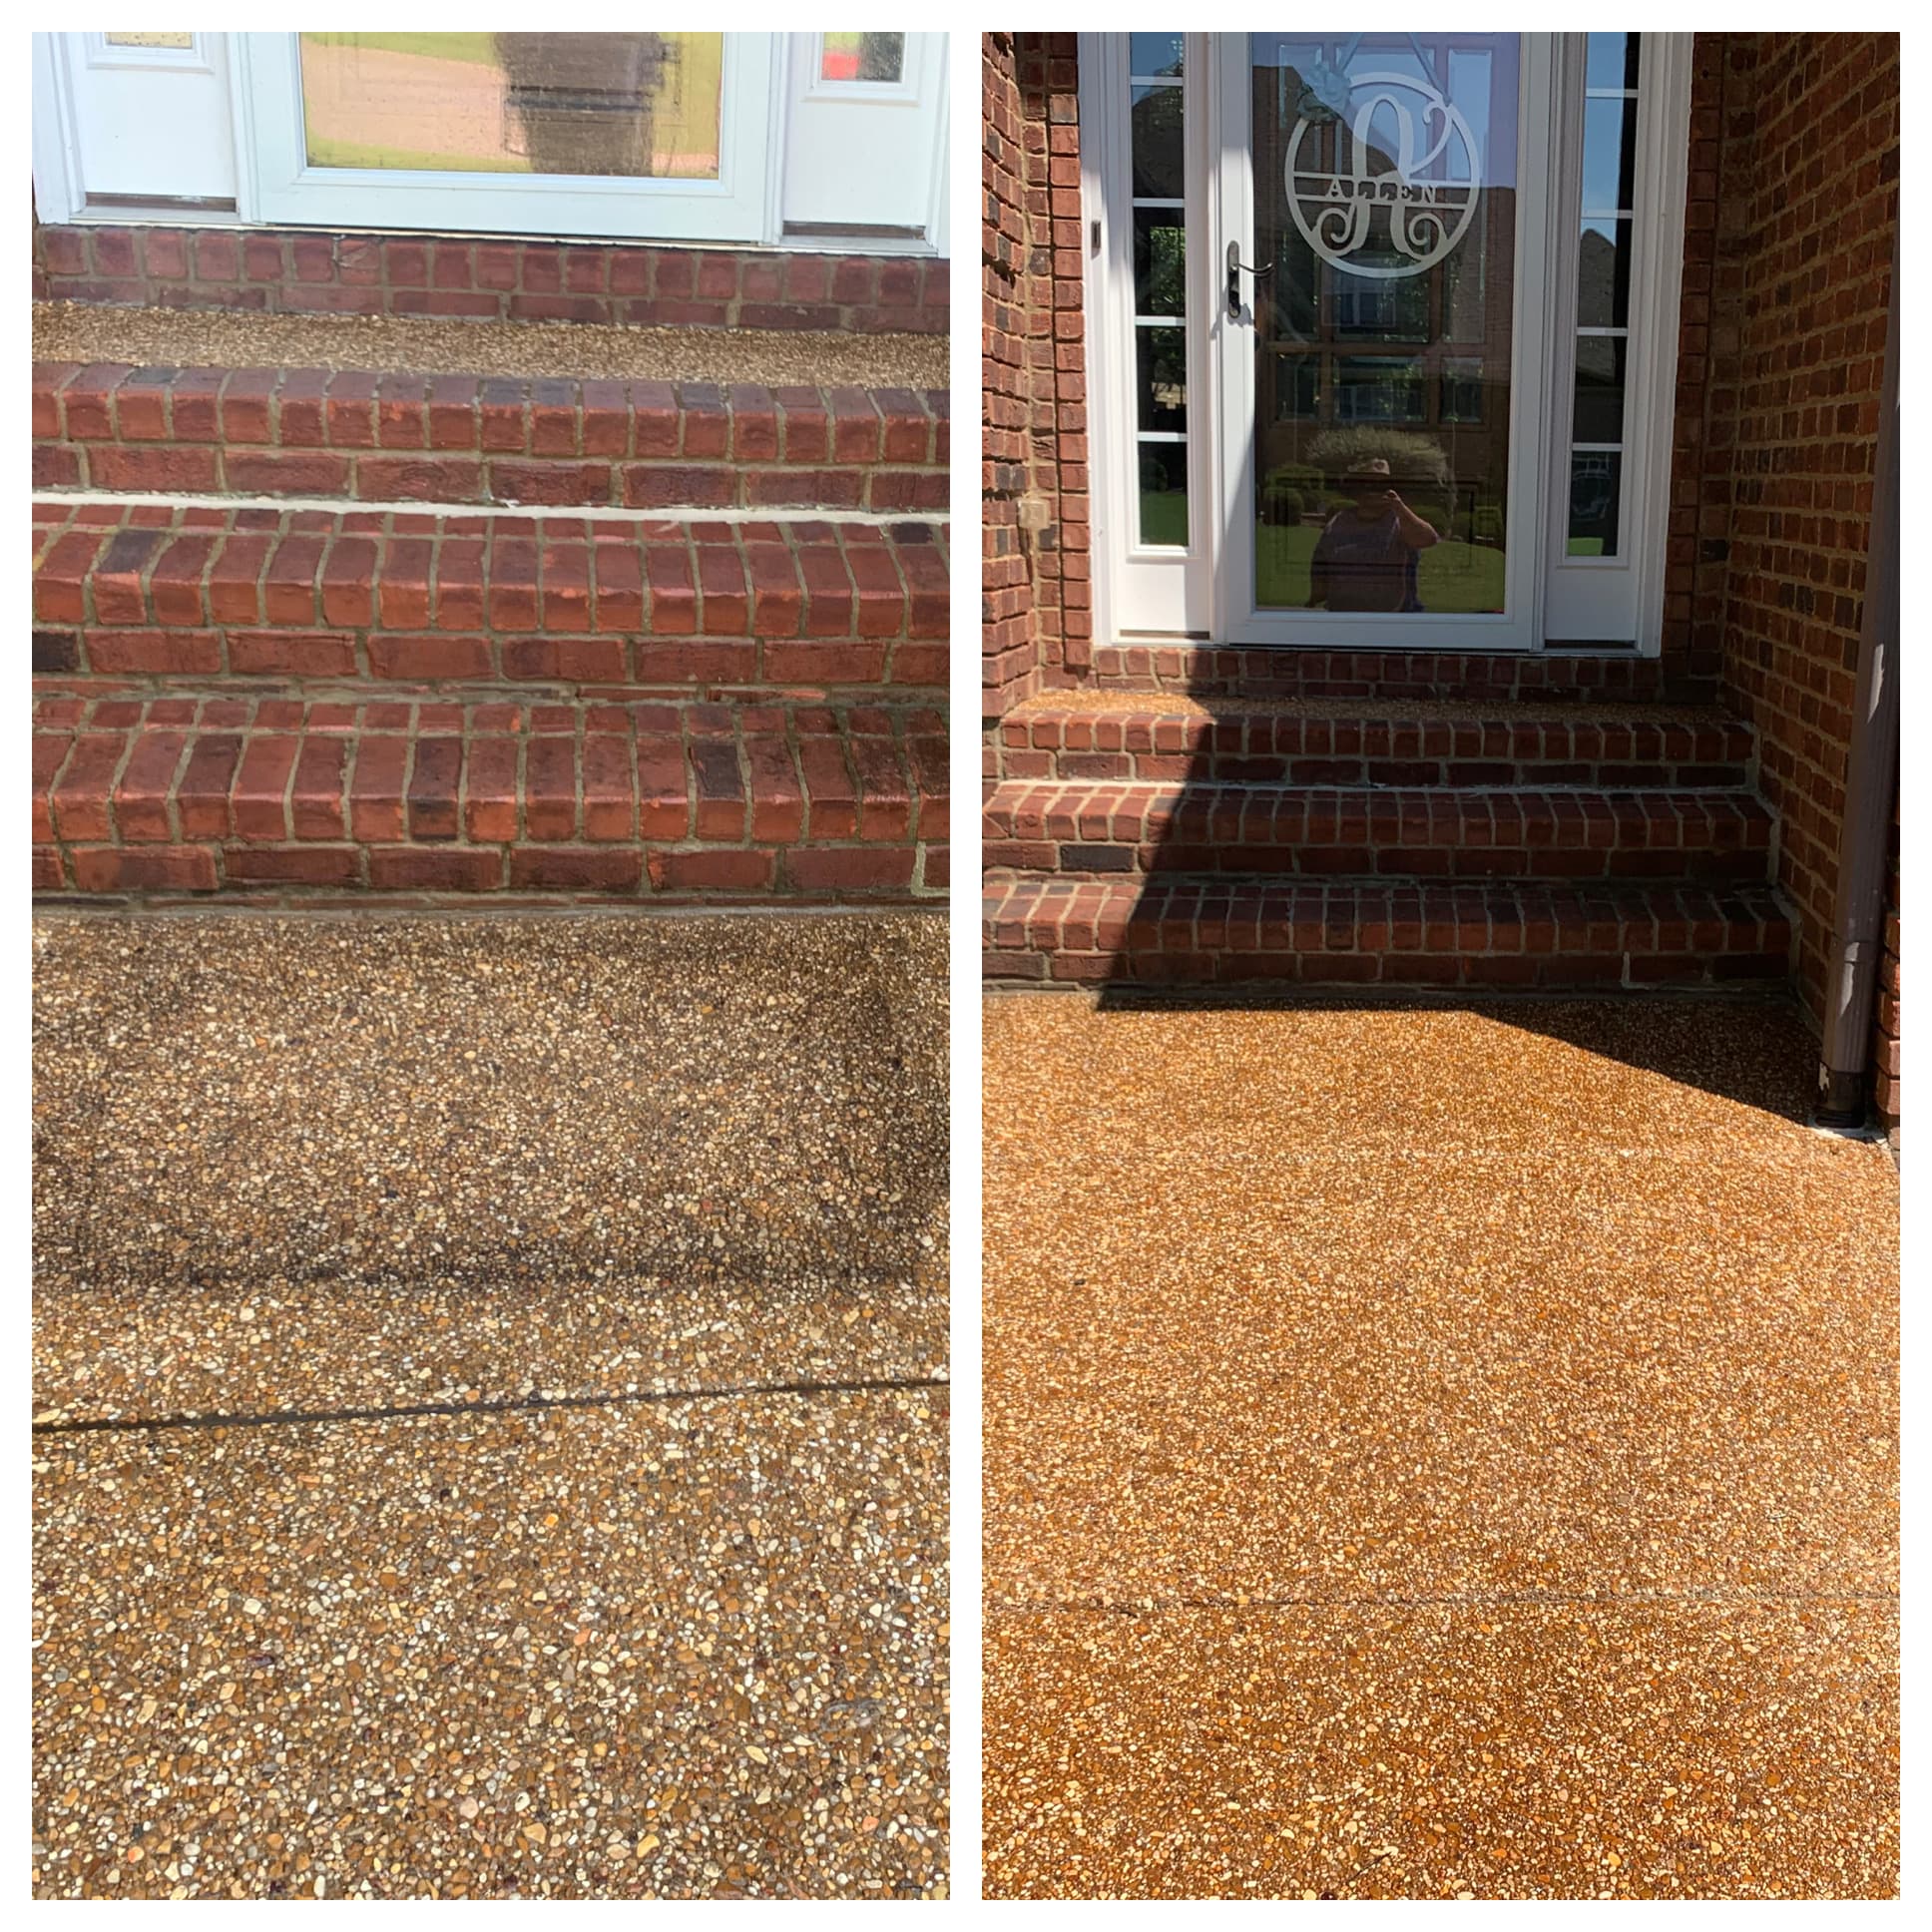 Driveway Wash and Seal in Fairview, TN